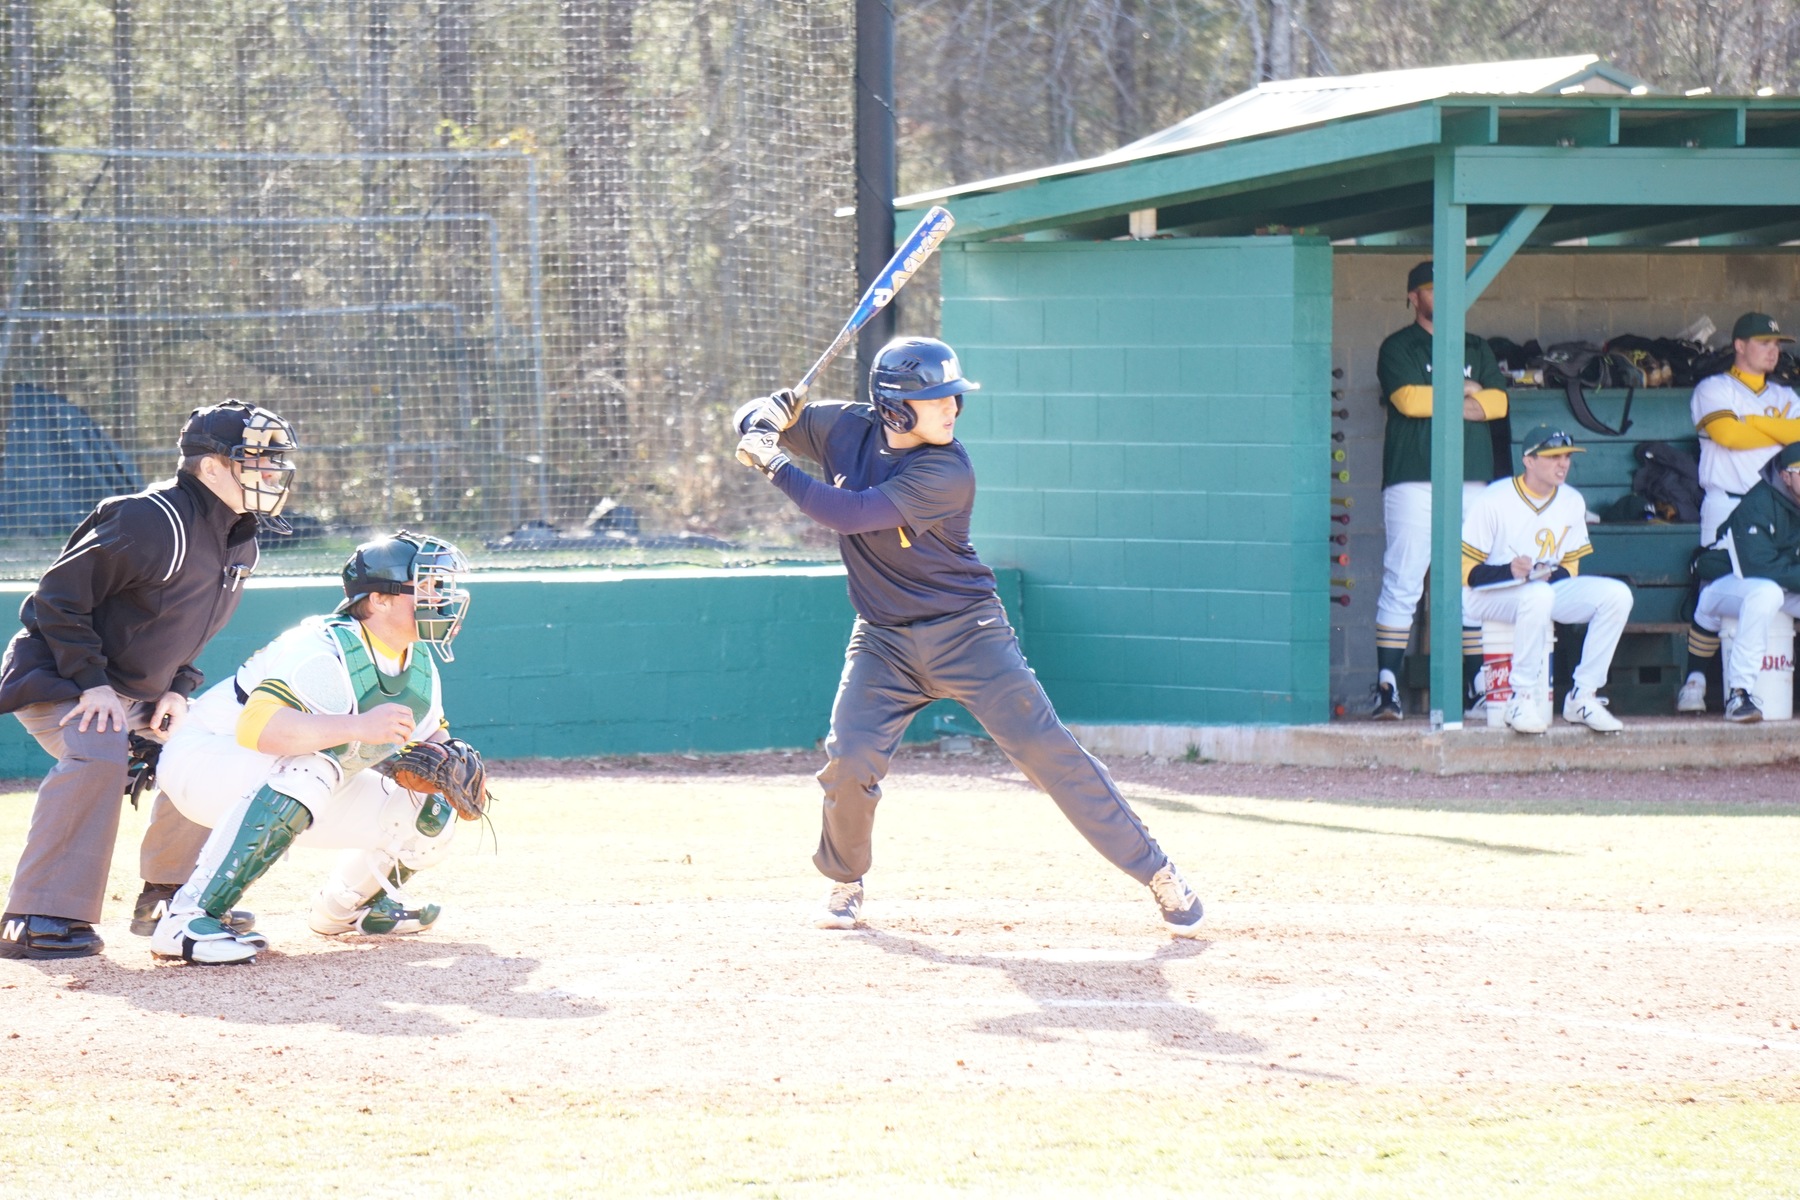 John Magnuson and the MCC baseball team rallied in the seventh inning of game two on Saturday to win the weekend series at Motlow State